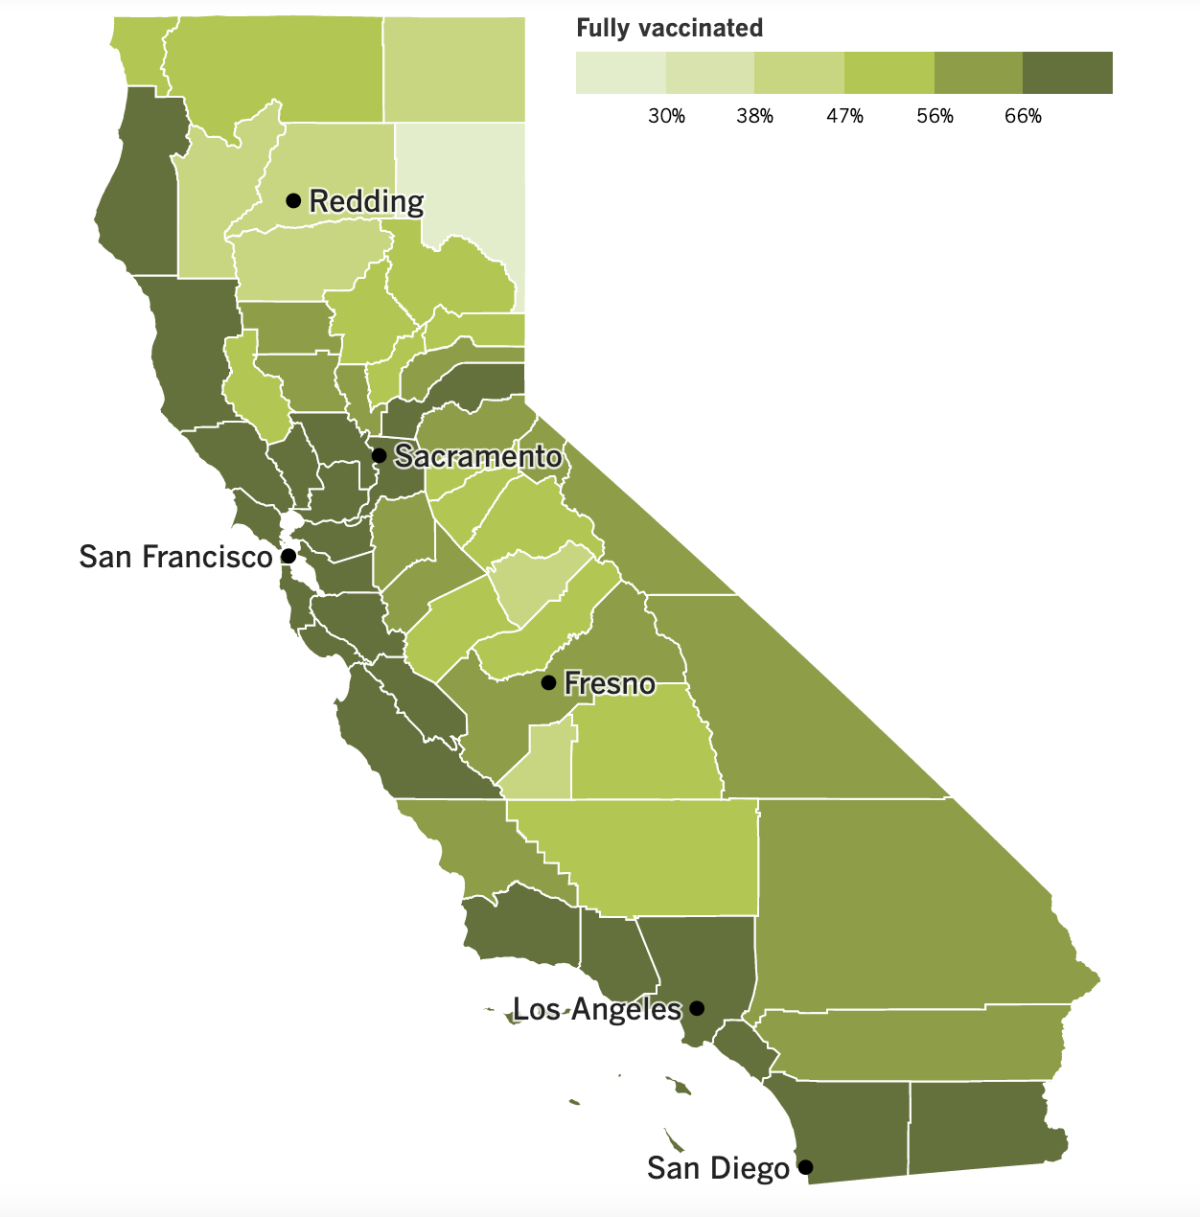 A map showing California's COVID-19 vaccination progress by county as of May 24, 2022.